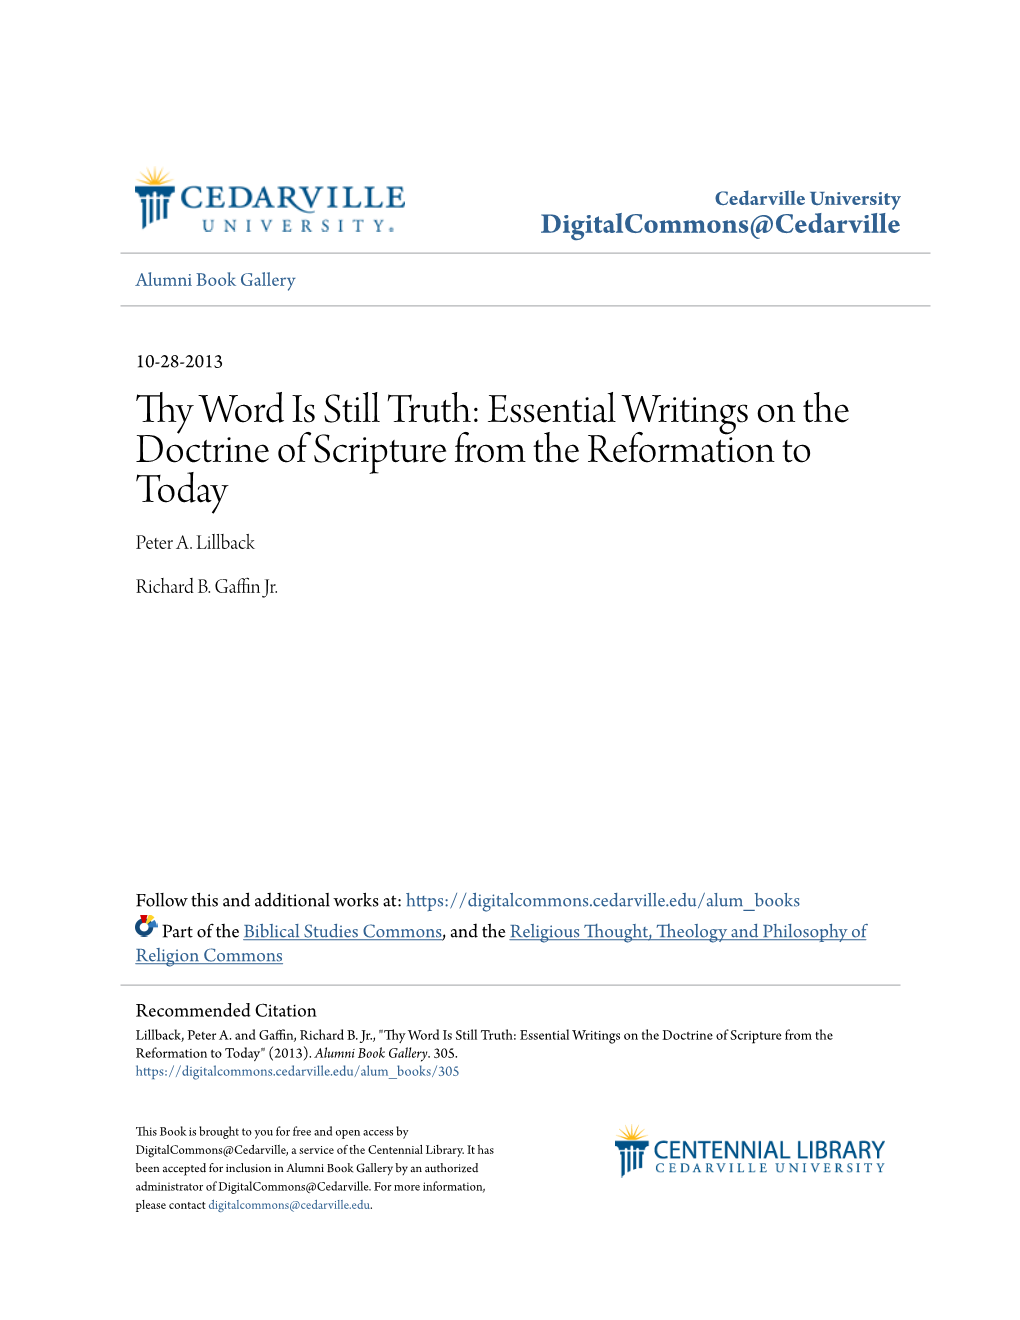 Thy Word Is Still Truth: Essential Writings on the Doctrine of Scripture from the Reformation to Today Peter A